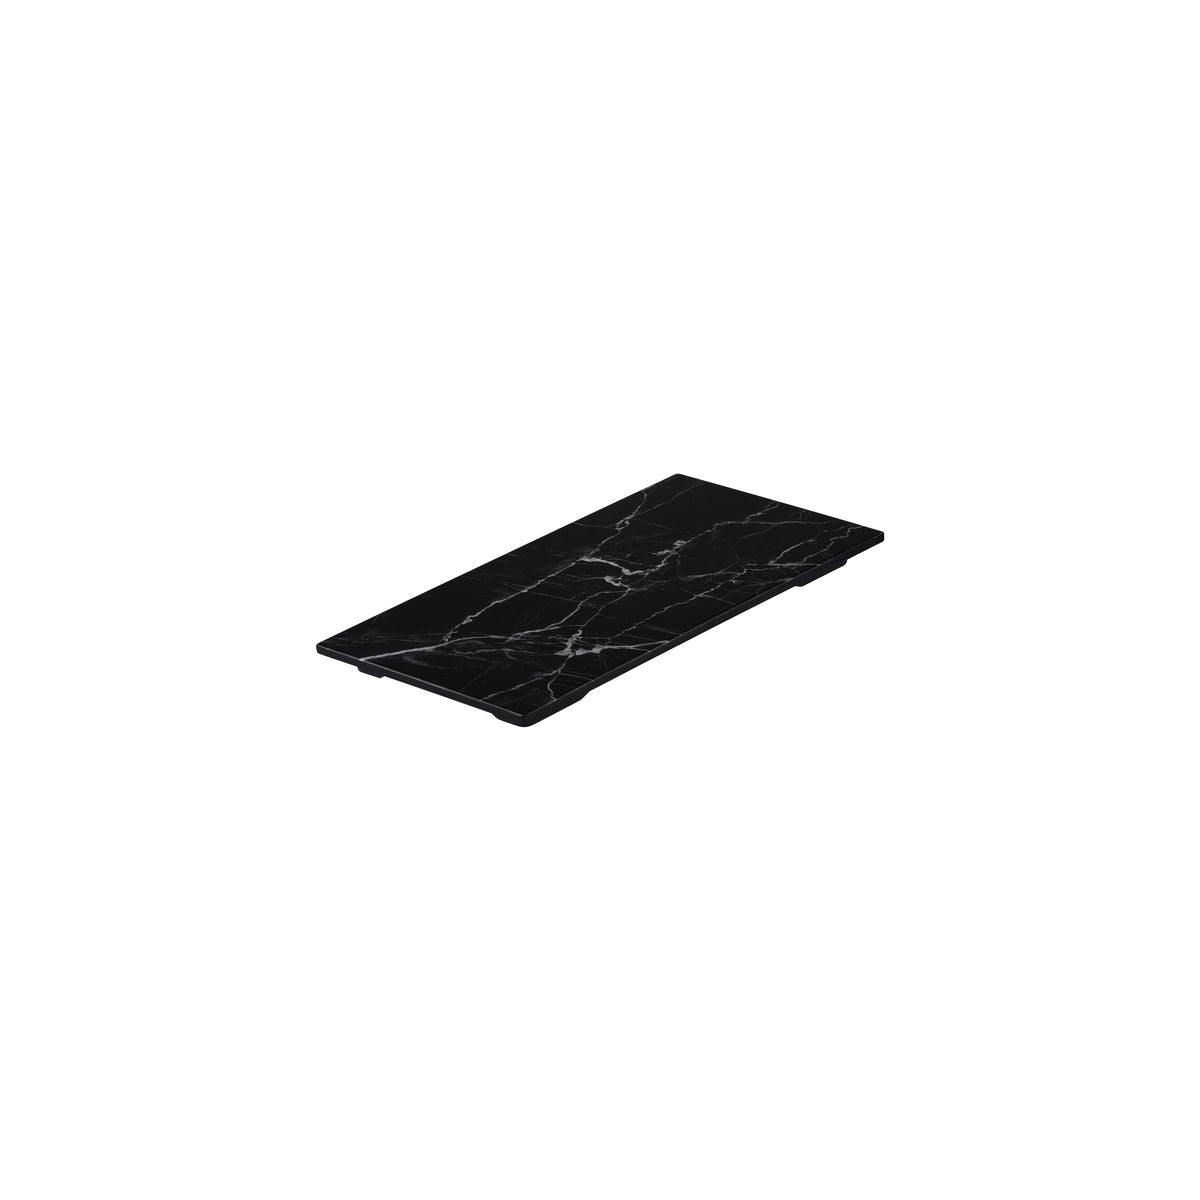 Flat Rectangular Platter, 325 x 176mm, Melamine - Black Marble from Ryner Melamine. Sold in boxes of 3. Hospitality quality at wholesale price with The Flying Fork! 